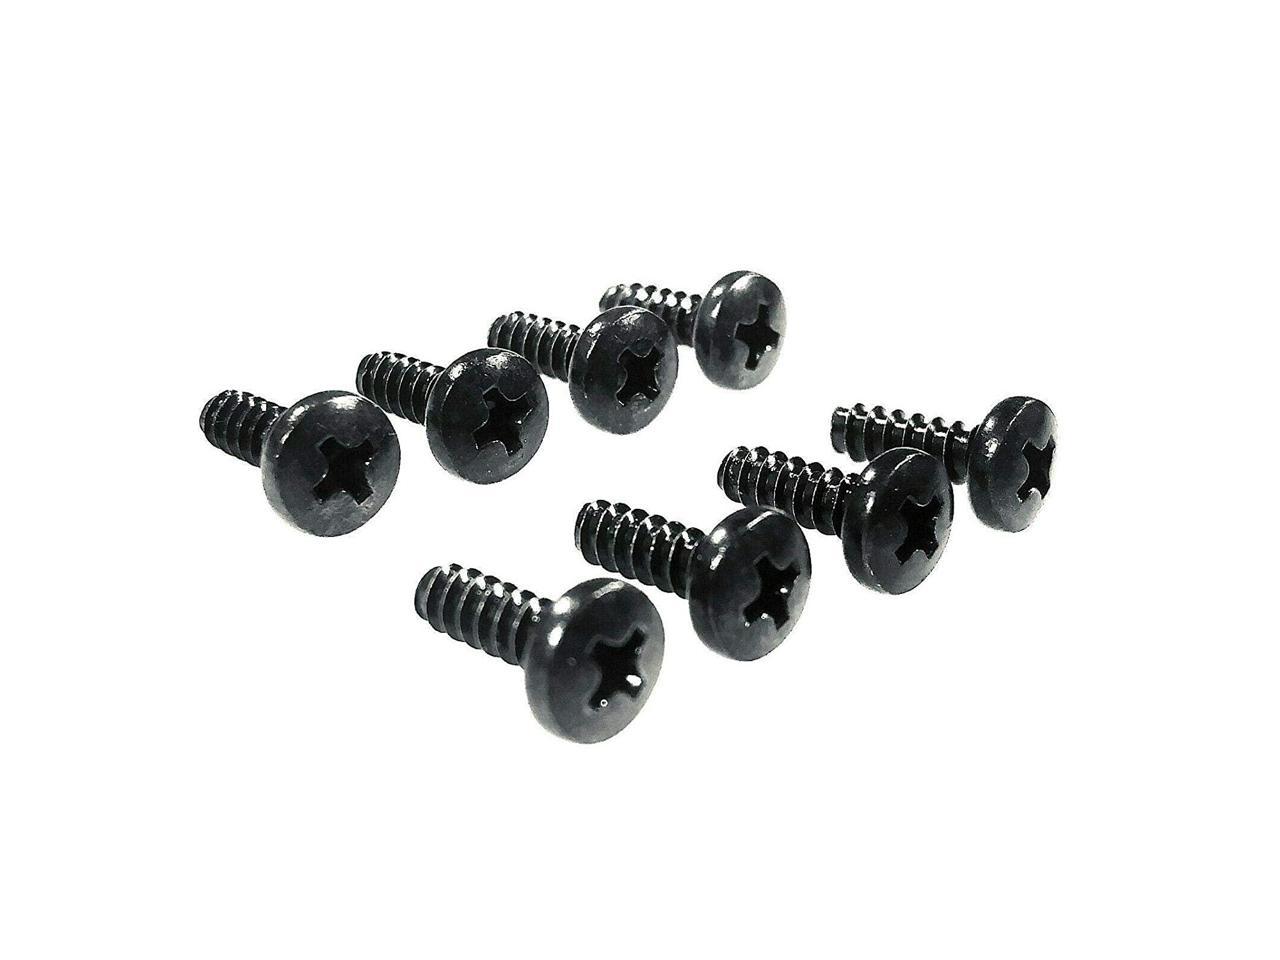 Genuine SAMSUNG Tapping Screw Pack of 4 for TV Base Stands and Guide Stands 